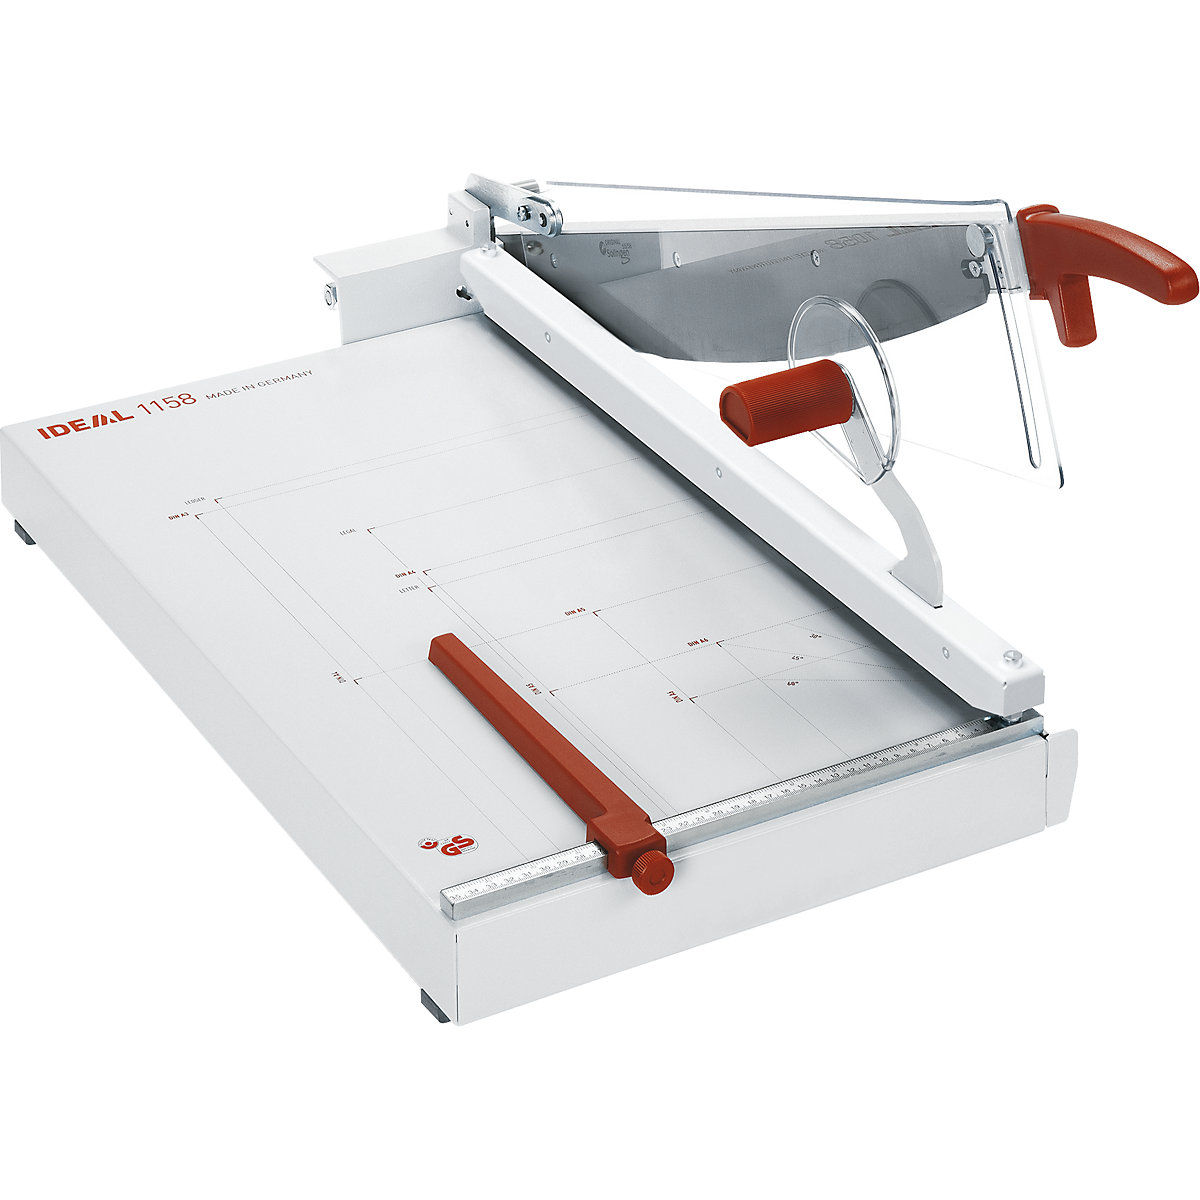 IDEAL 1158 lever guillotine - IDEAL